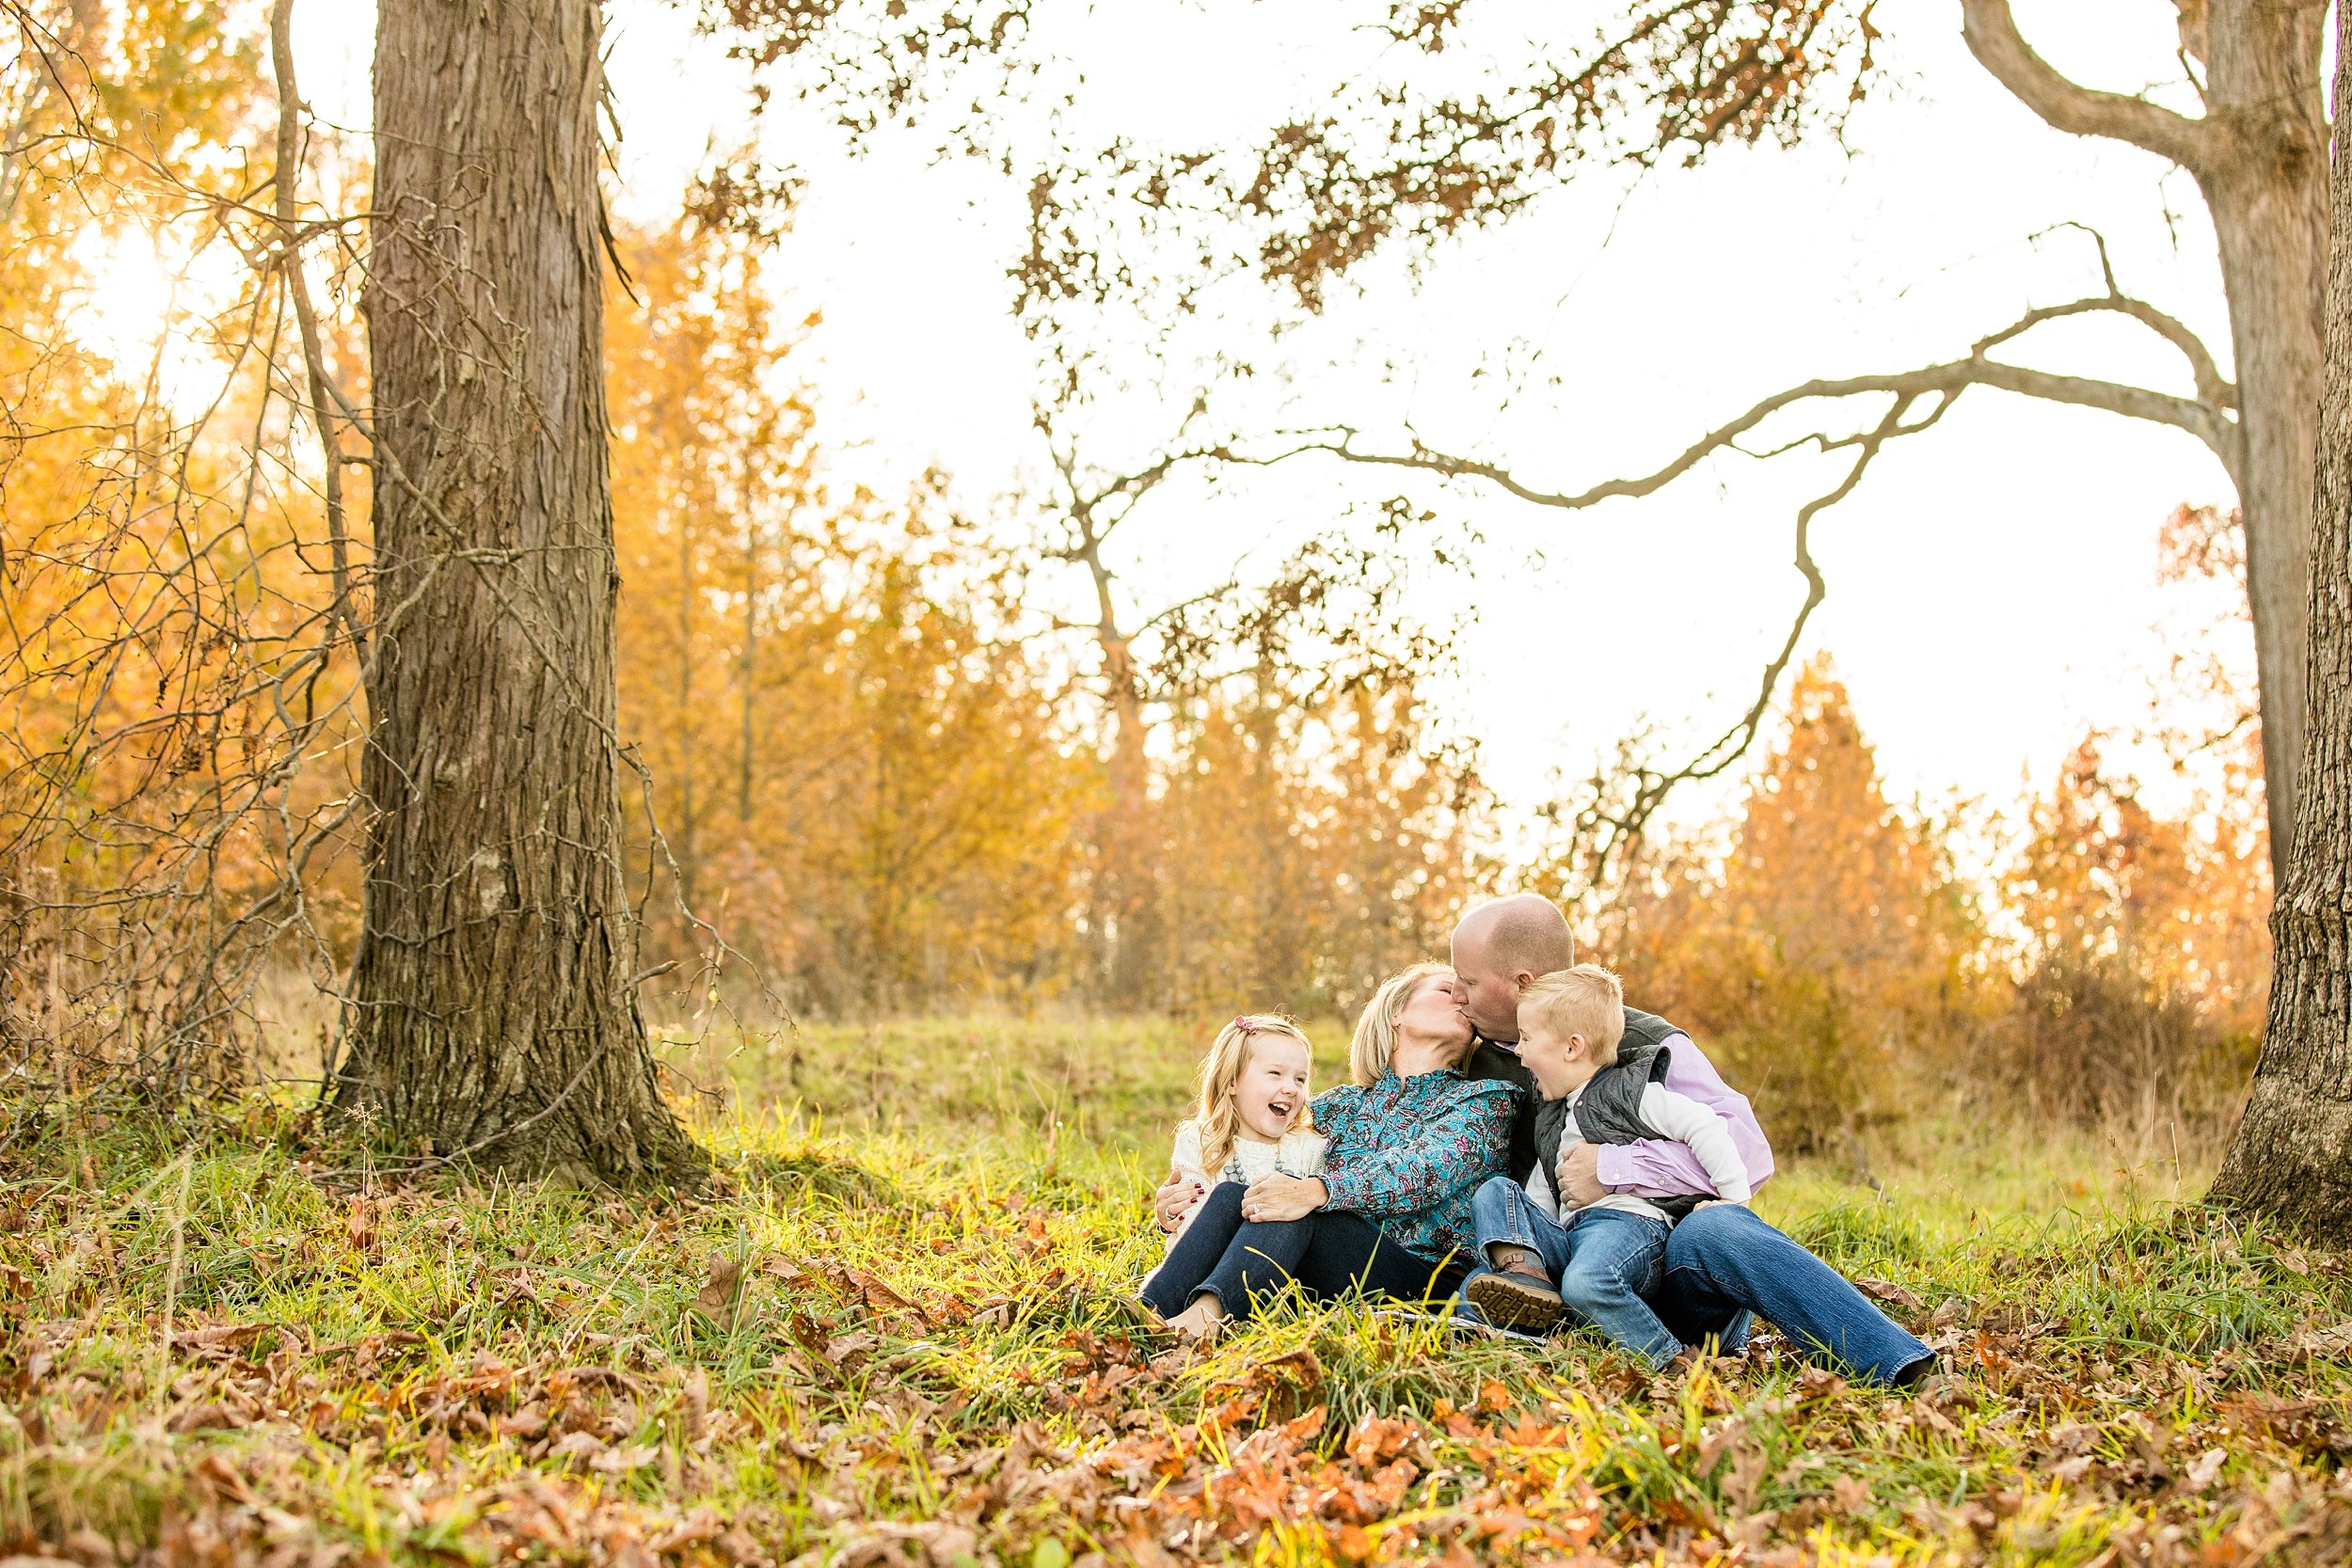 north park family photos, pittsburgh family photographer, cranberry township photographer, zelienople photographer